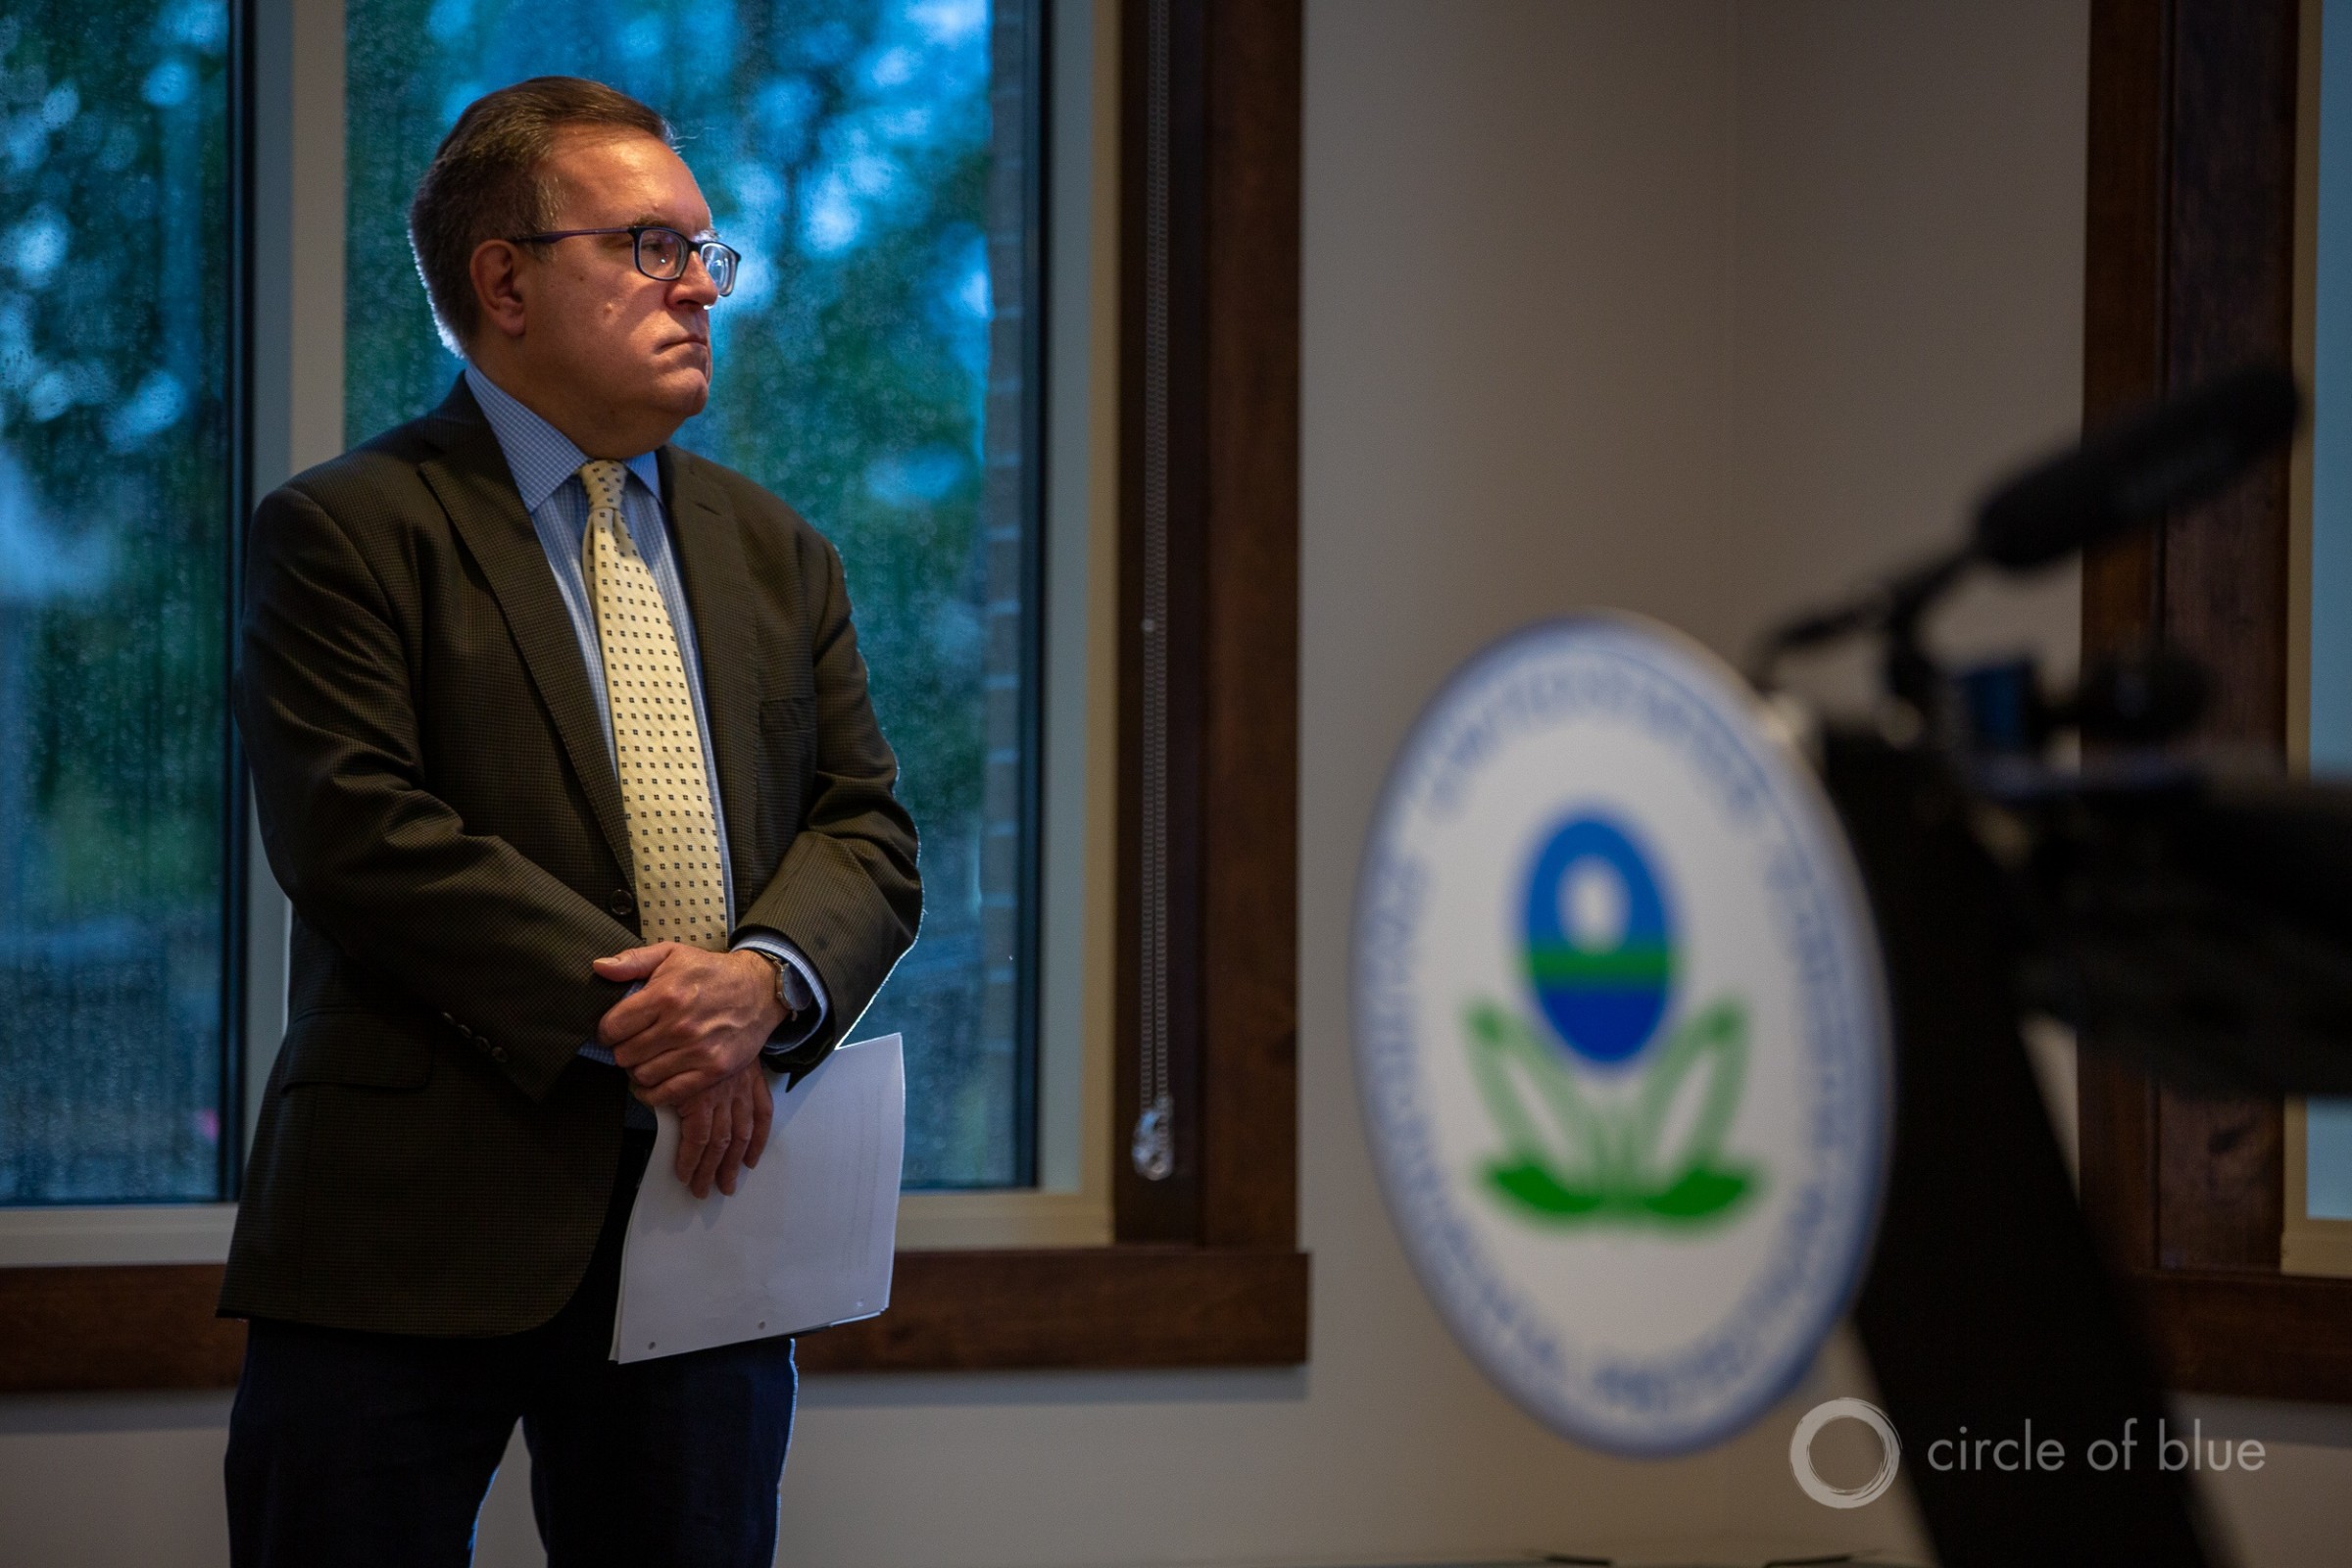 Andrew Wheeler, administrator of the U.S. Environmental Protection Agency, prepares to speak at an event in Traverse City, Michigan, on September 30, 2020. Photo © J. Carl Ganter/Circle of Blue